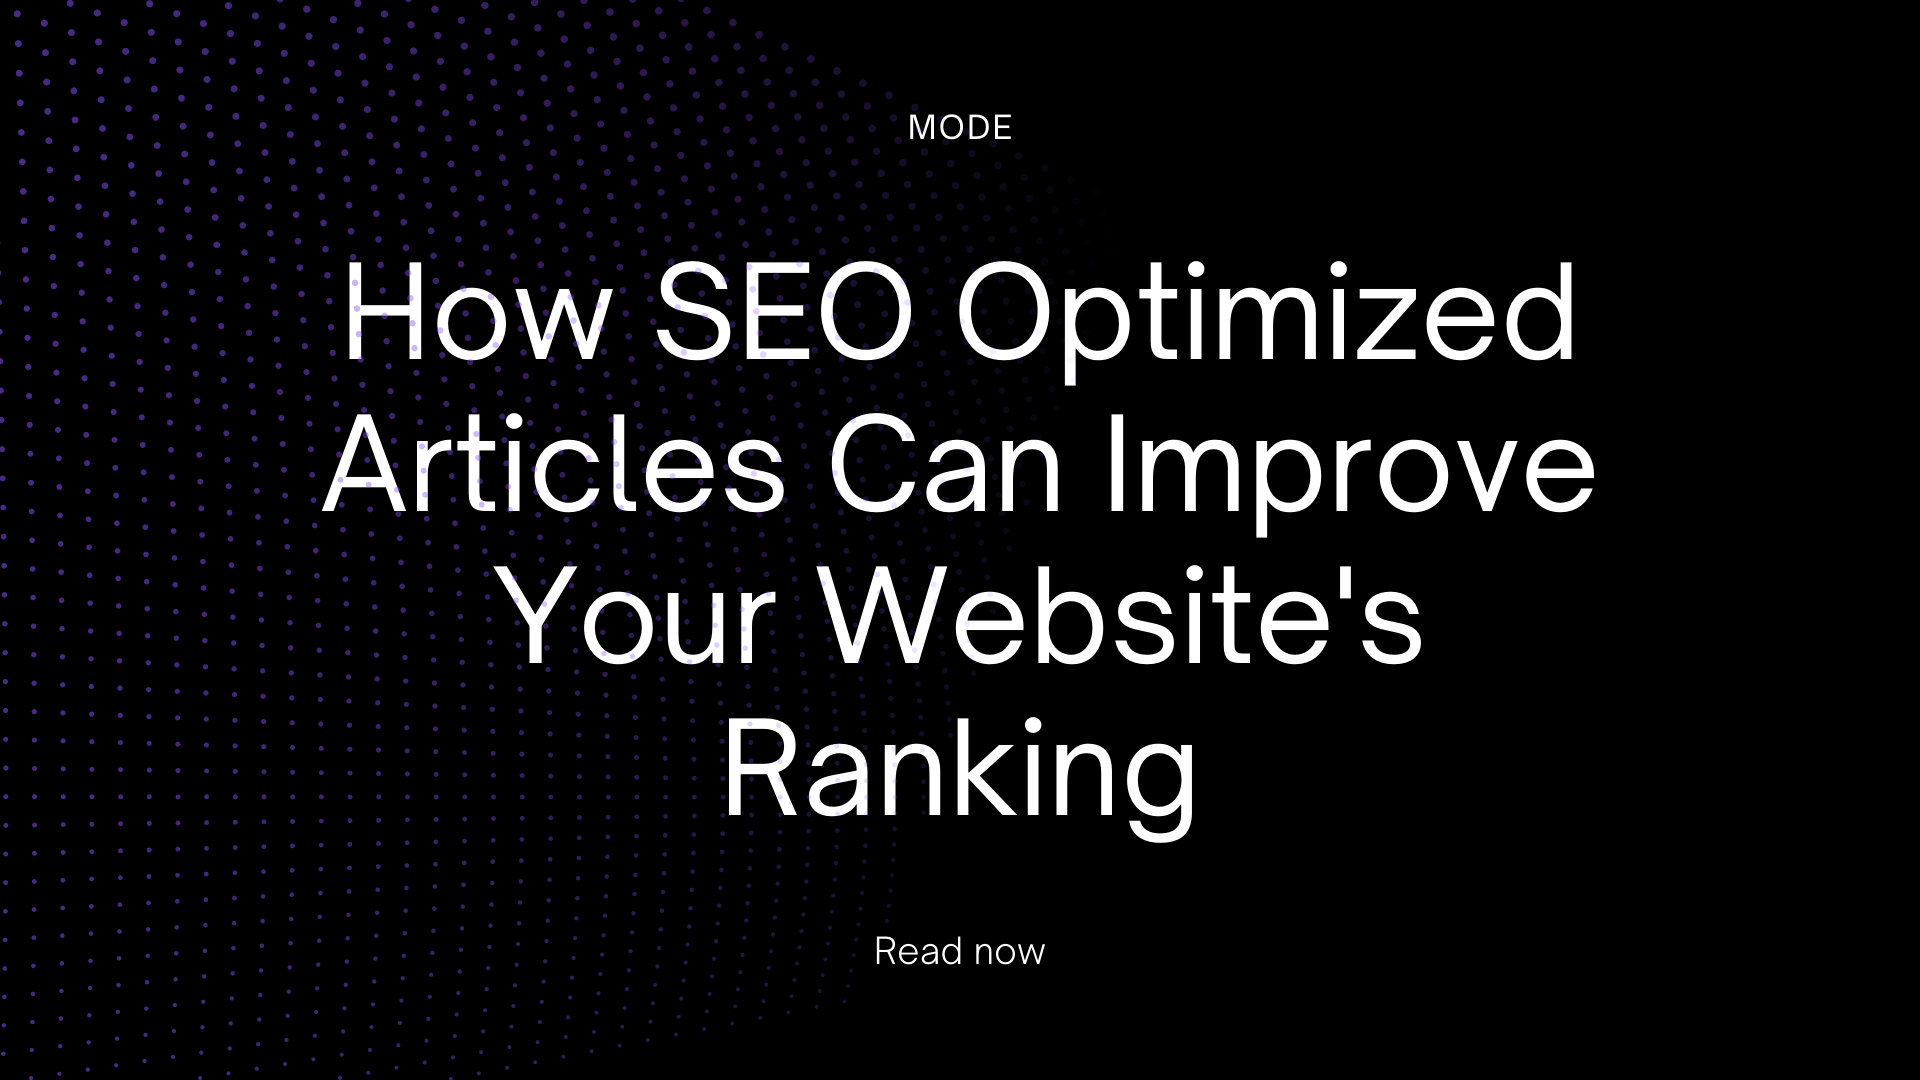 How SEO Optimized Articles Can Improve Your Website's Ranking